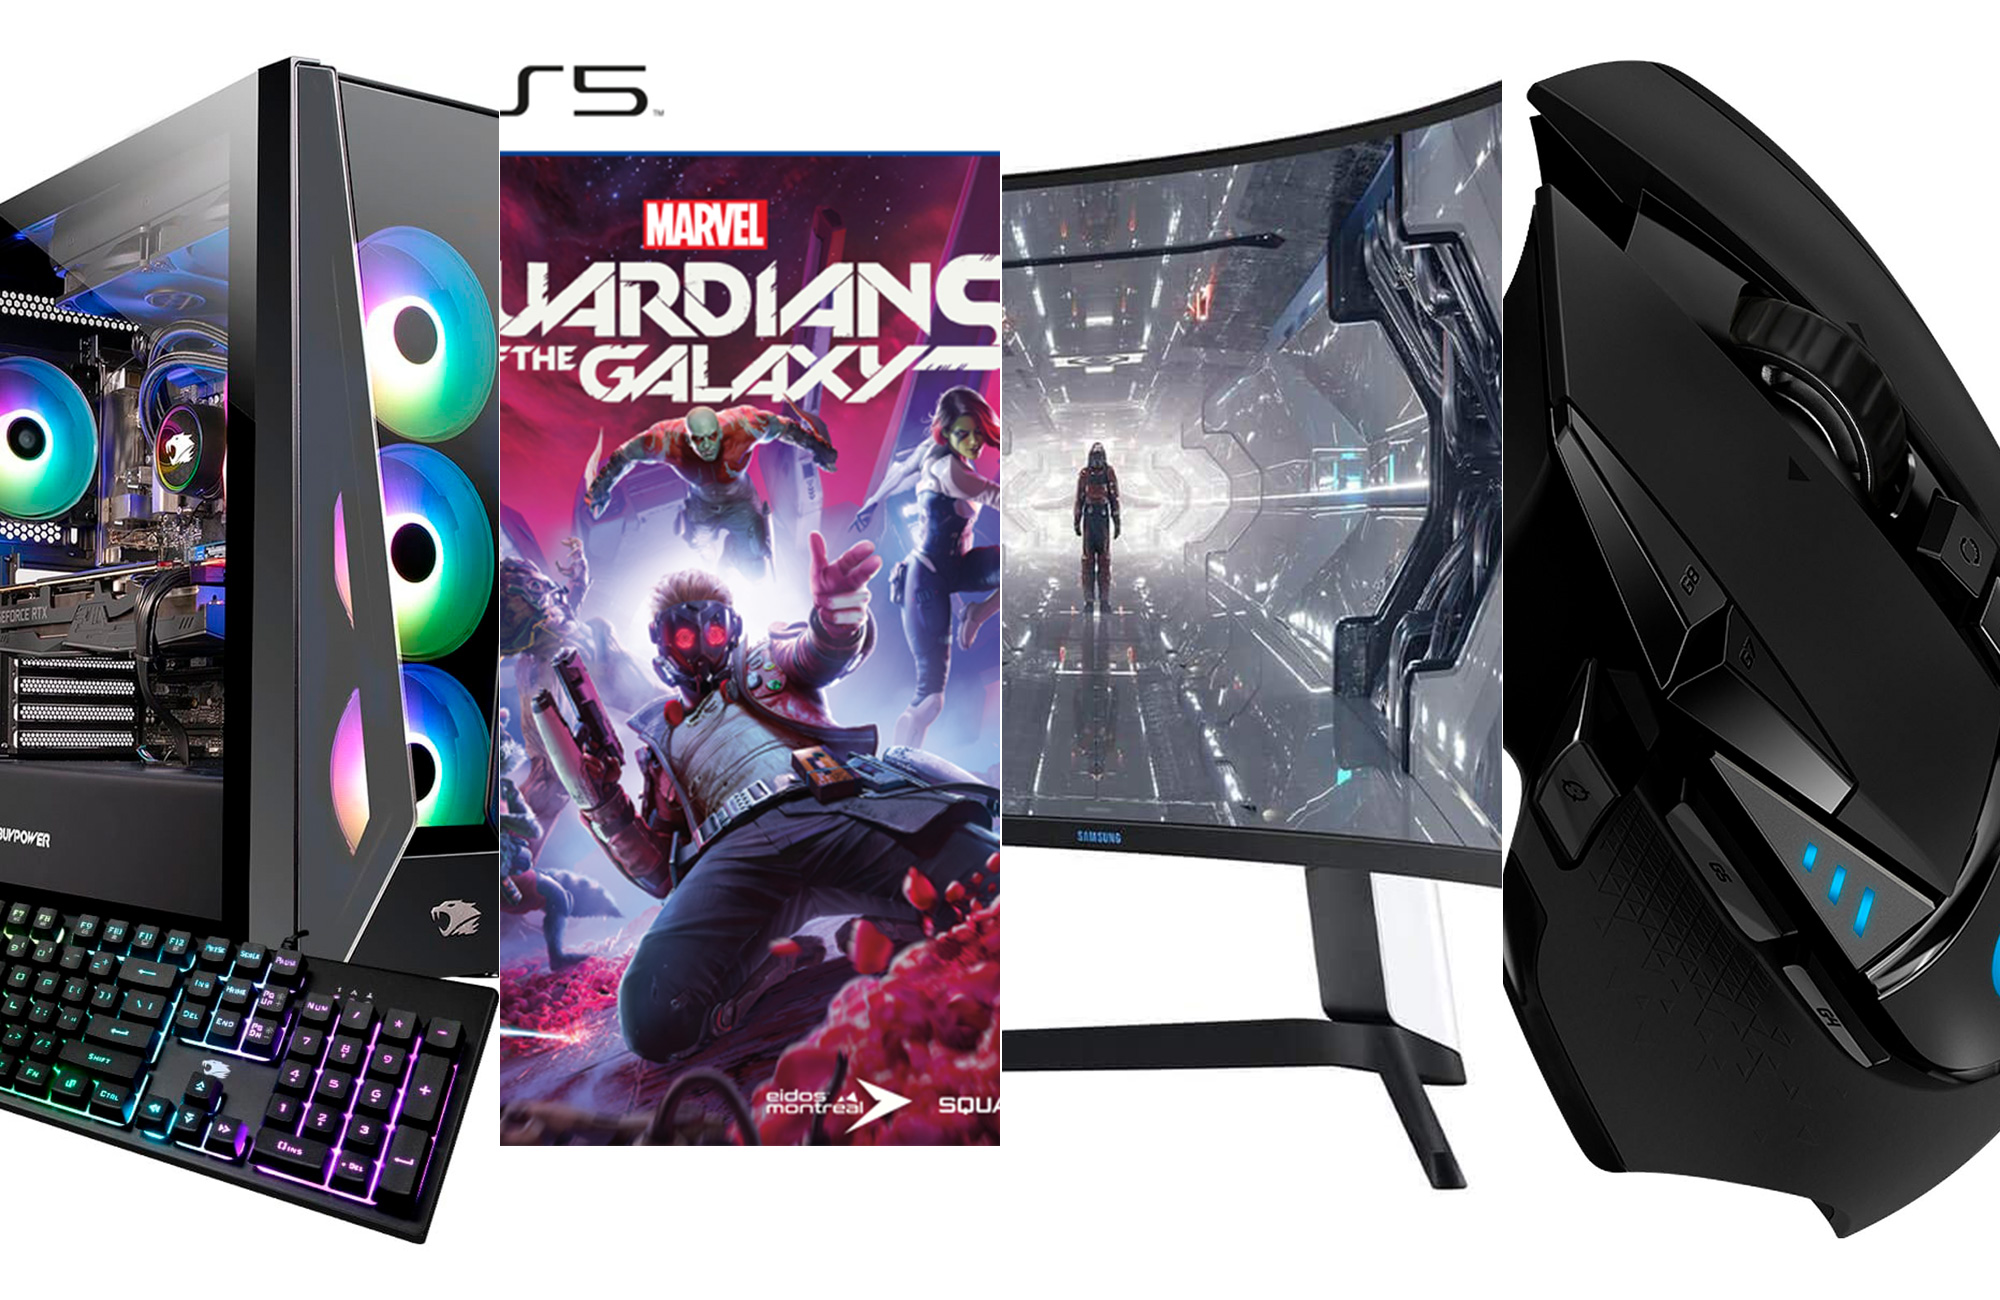 Best Black Friday 2018 PC gaming deals